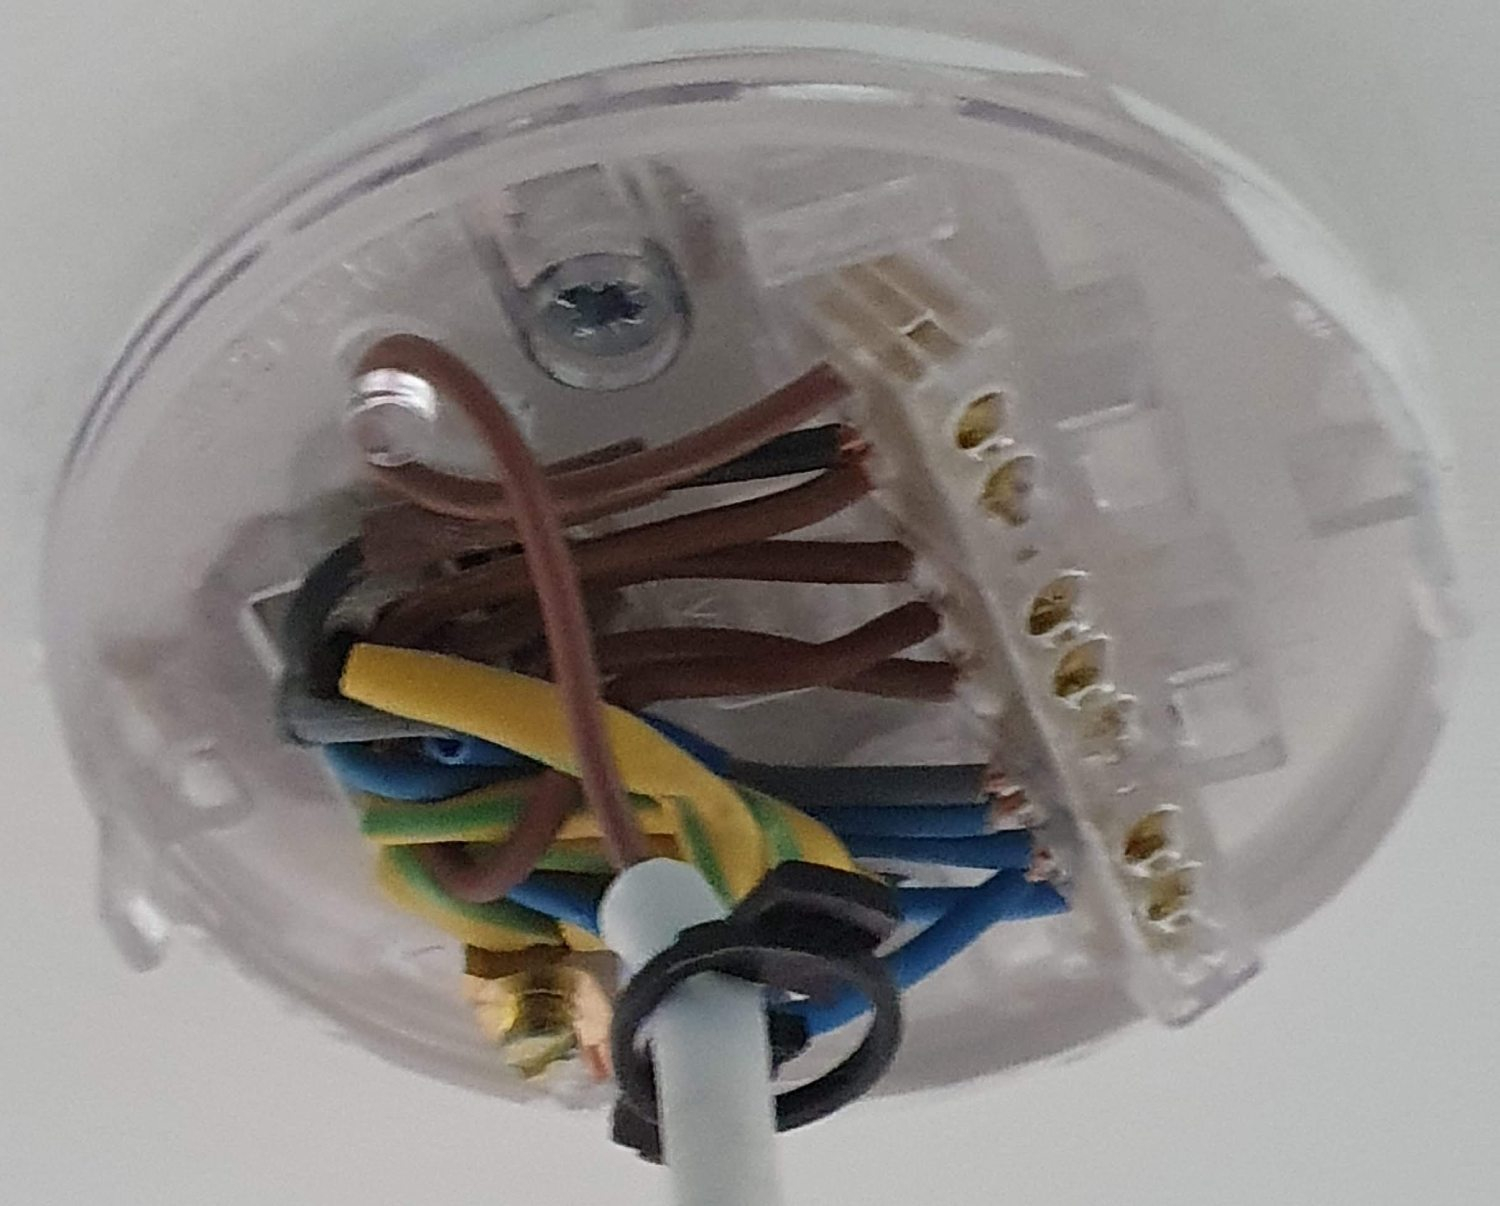 Changing a light pendant (with 4 wires) to light fitting {filename} | ElectriciansForums.net